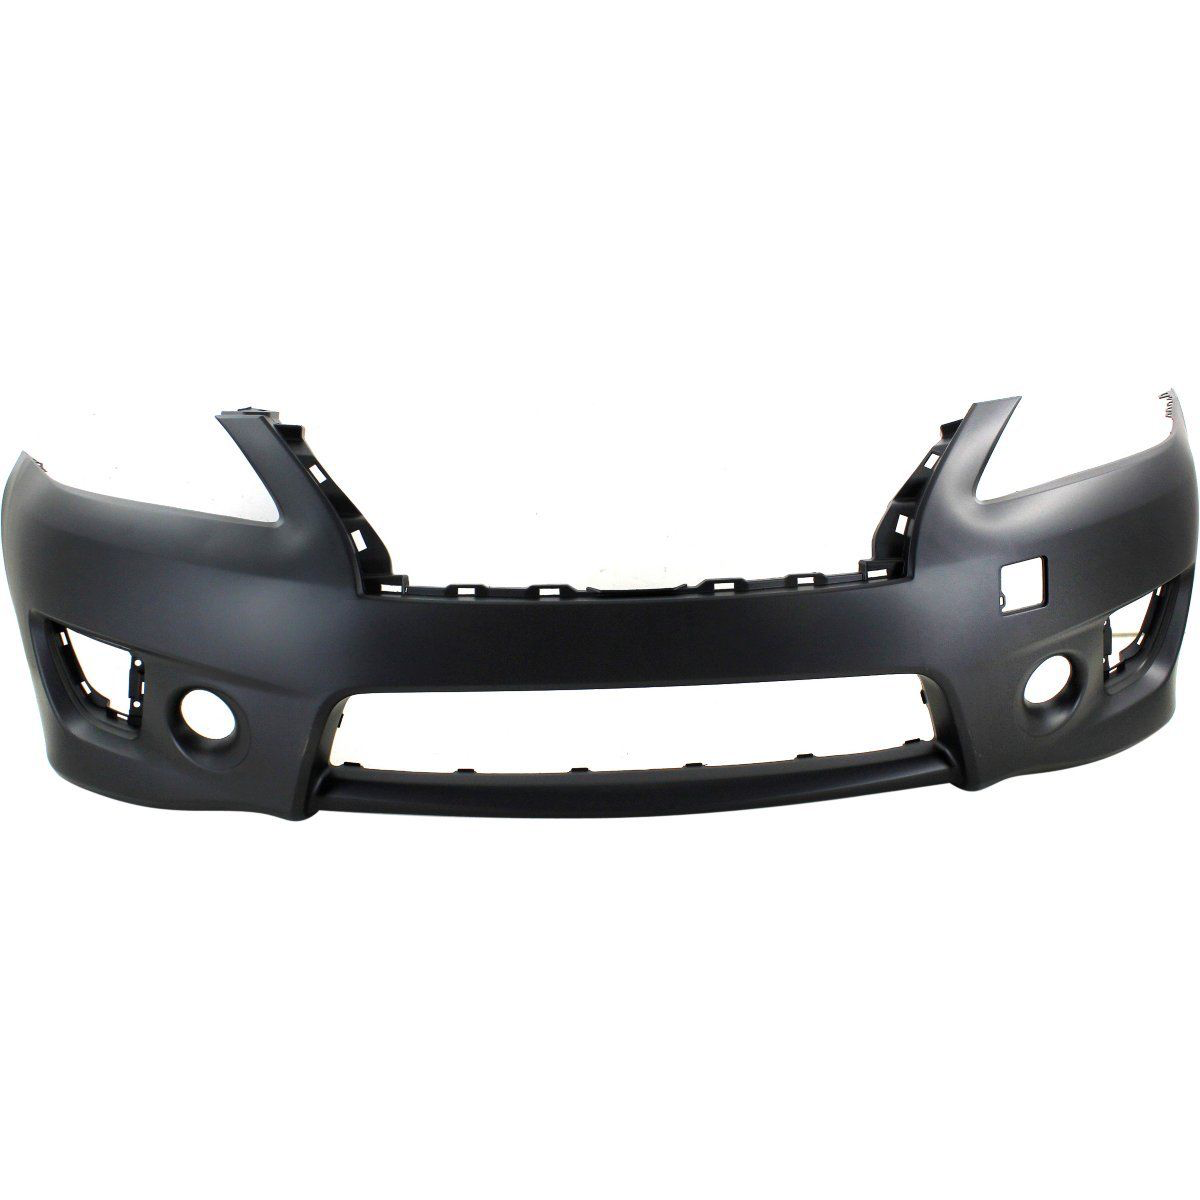 2013-2015 NISSAN SENTRA Front Bumper Cover SR Painted to Match